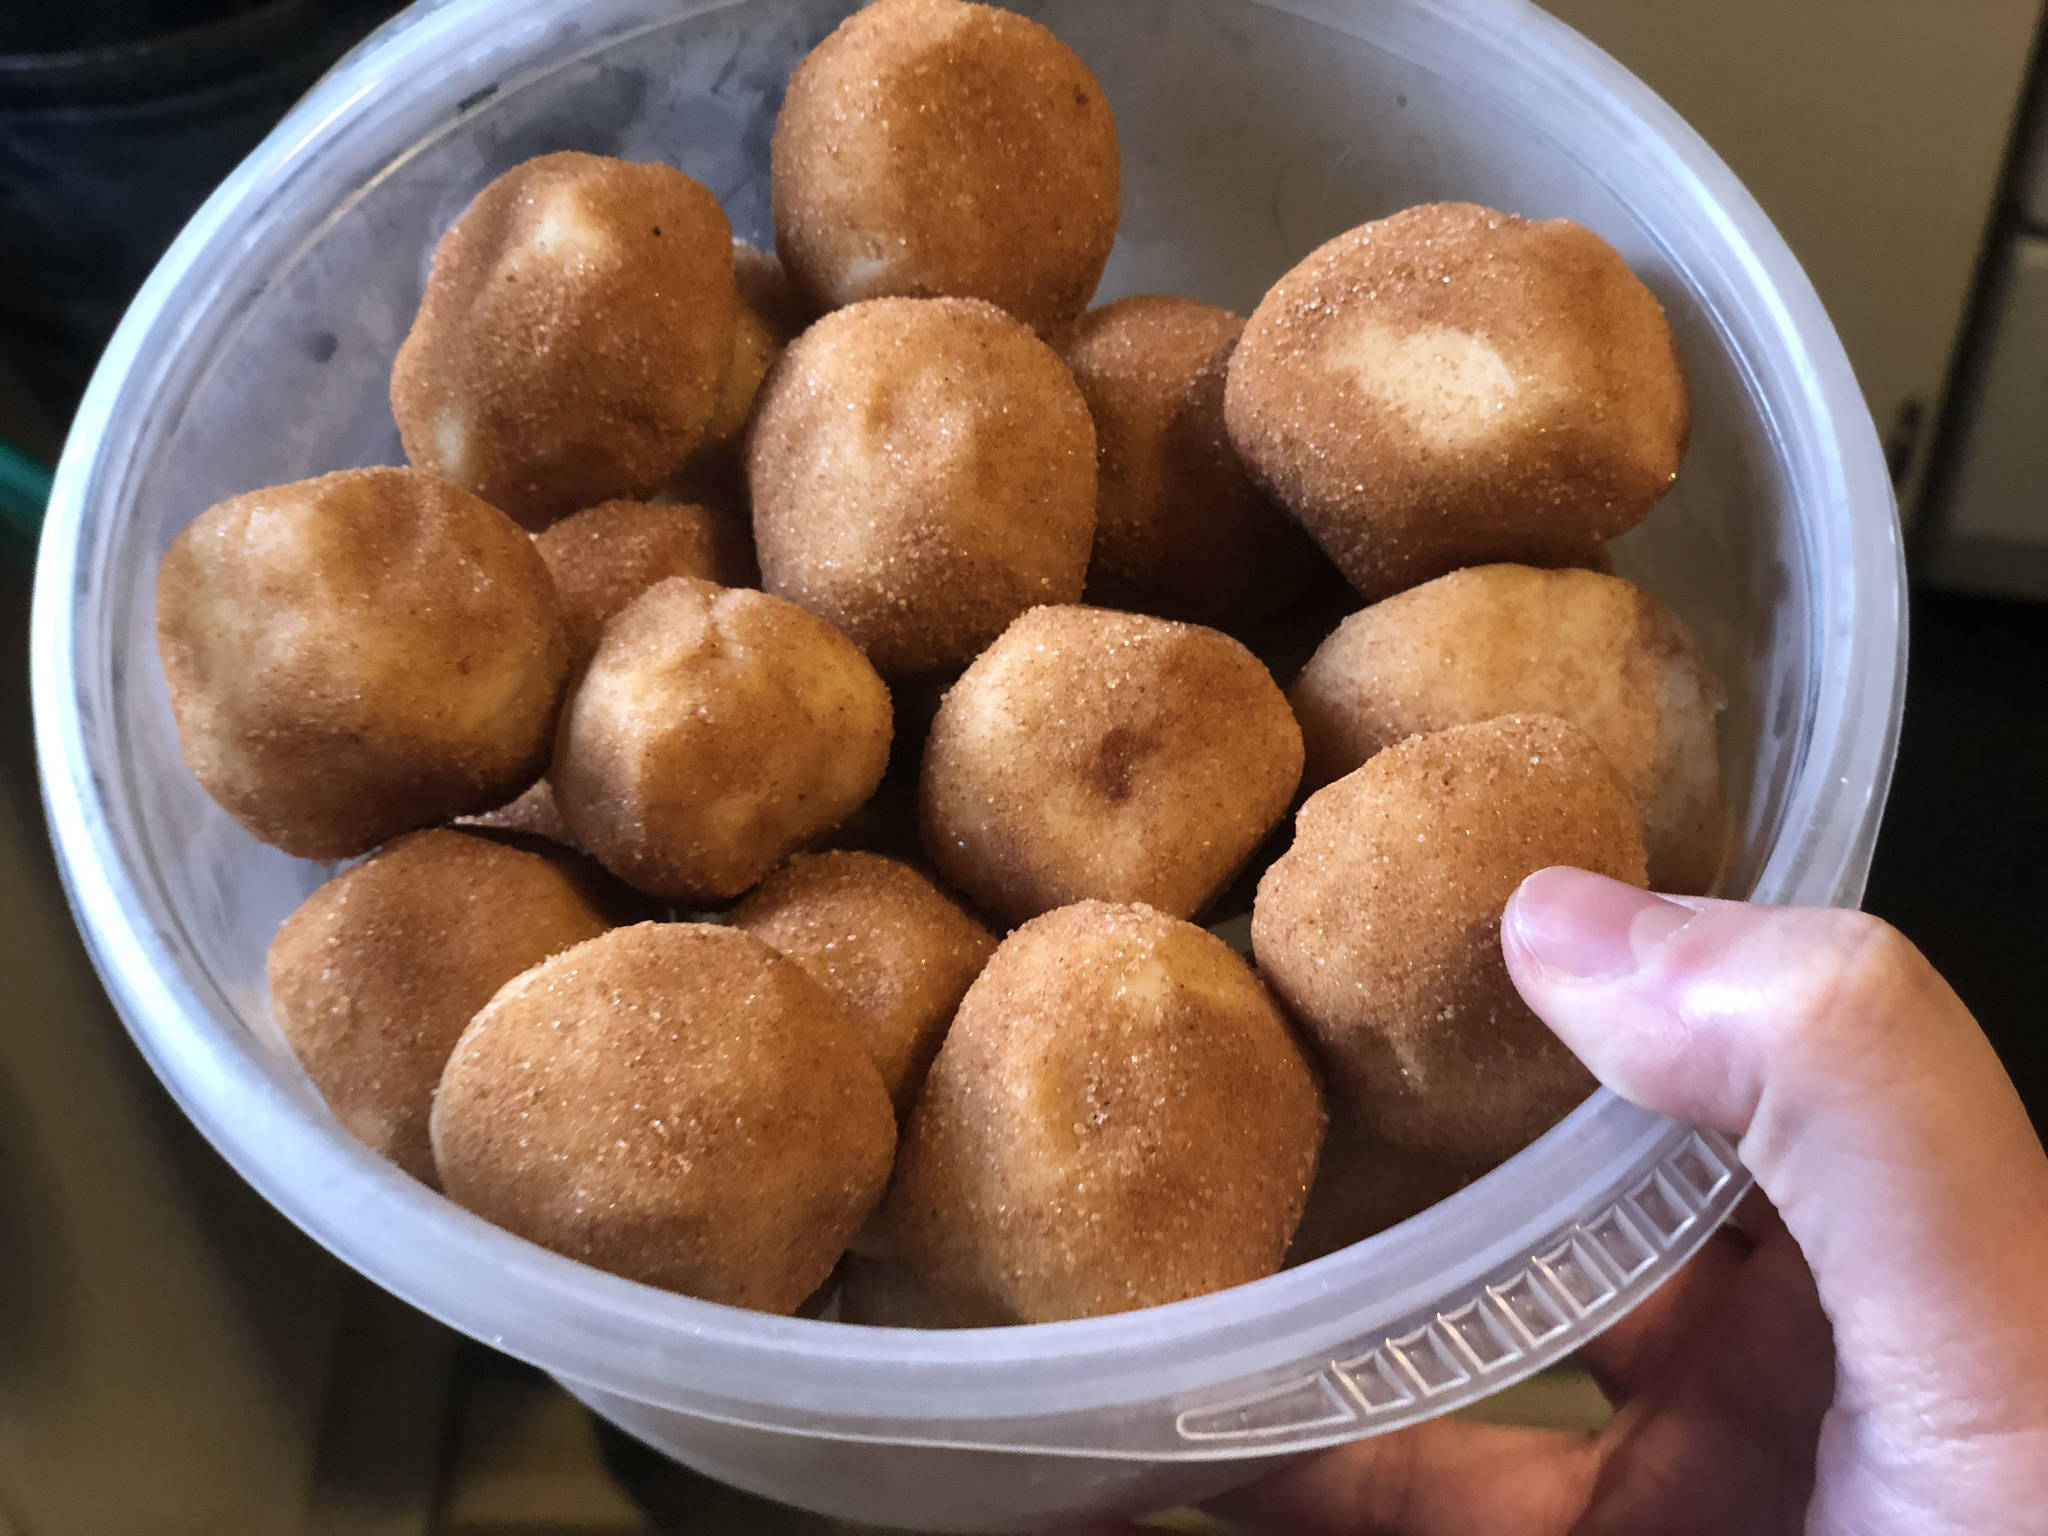 Balls of snickerdoodle dough kept in the freezer is a gift to Future You, photographed on Saturday, Oct. 10, 2020, in Anchorage, Alaska. (Photo by Victoria Petersen/Peninsula Clarion)